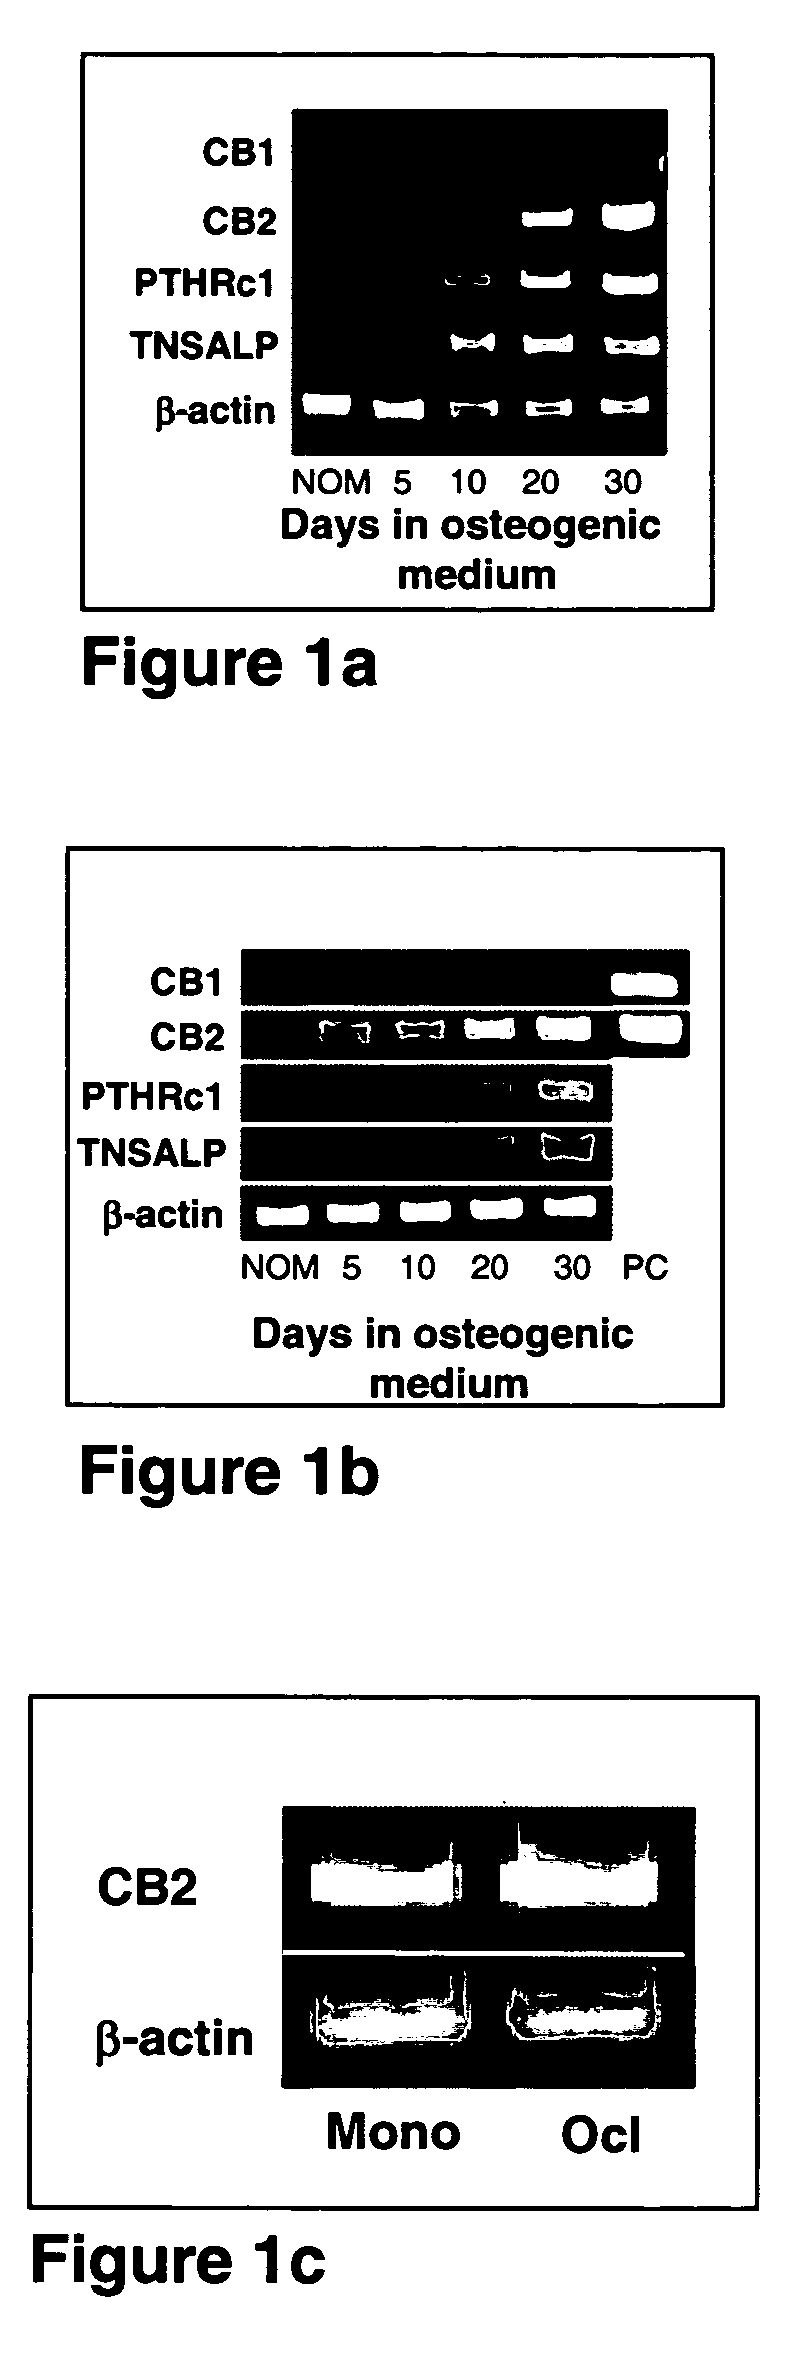 Methods, kits and pharmaceutical compositions for diagnosing, delaying onset of, preventing and/or treating osteoporosis